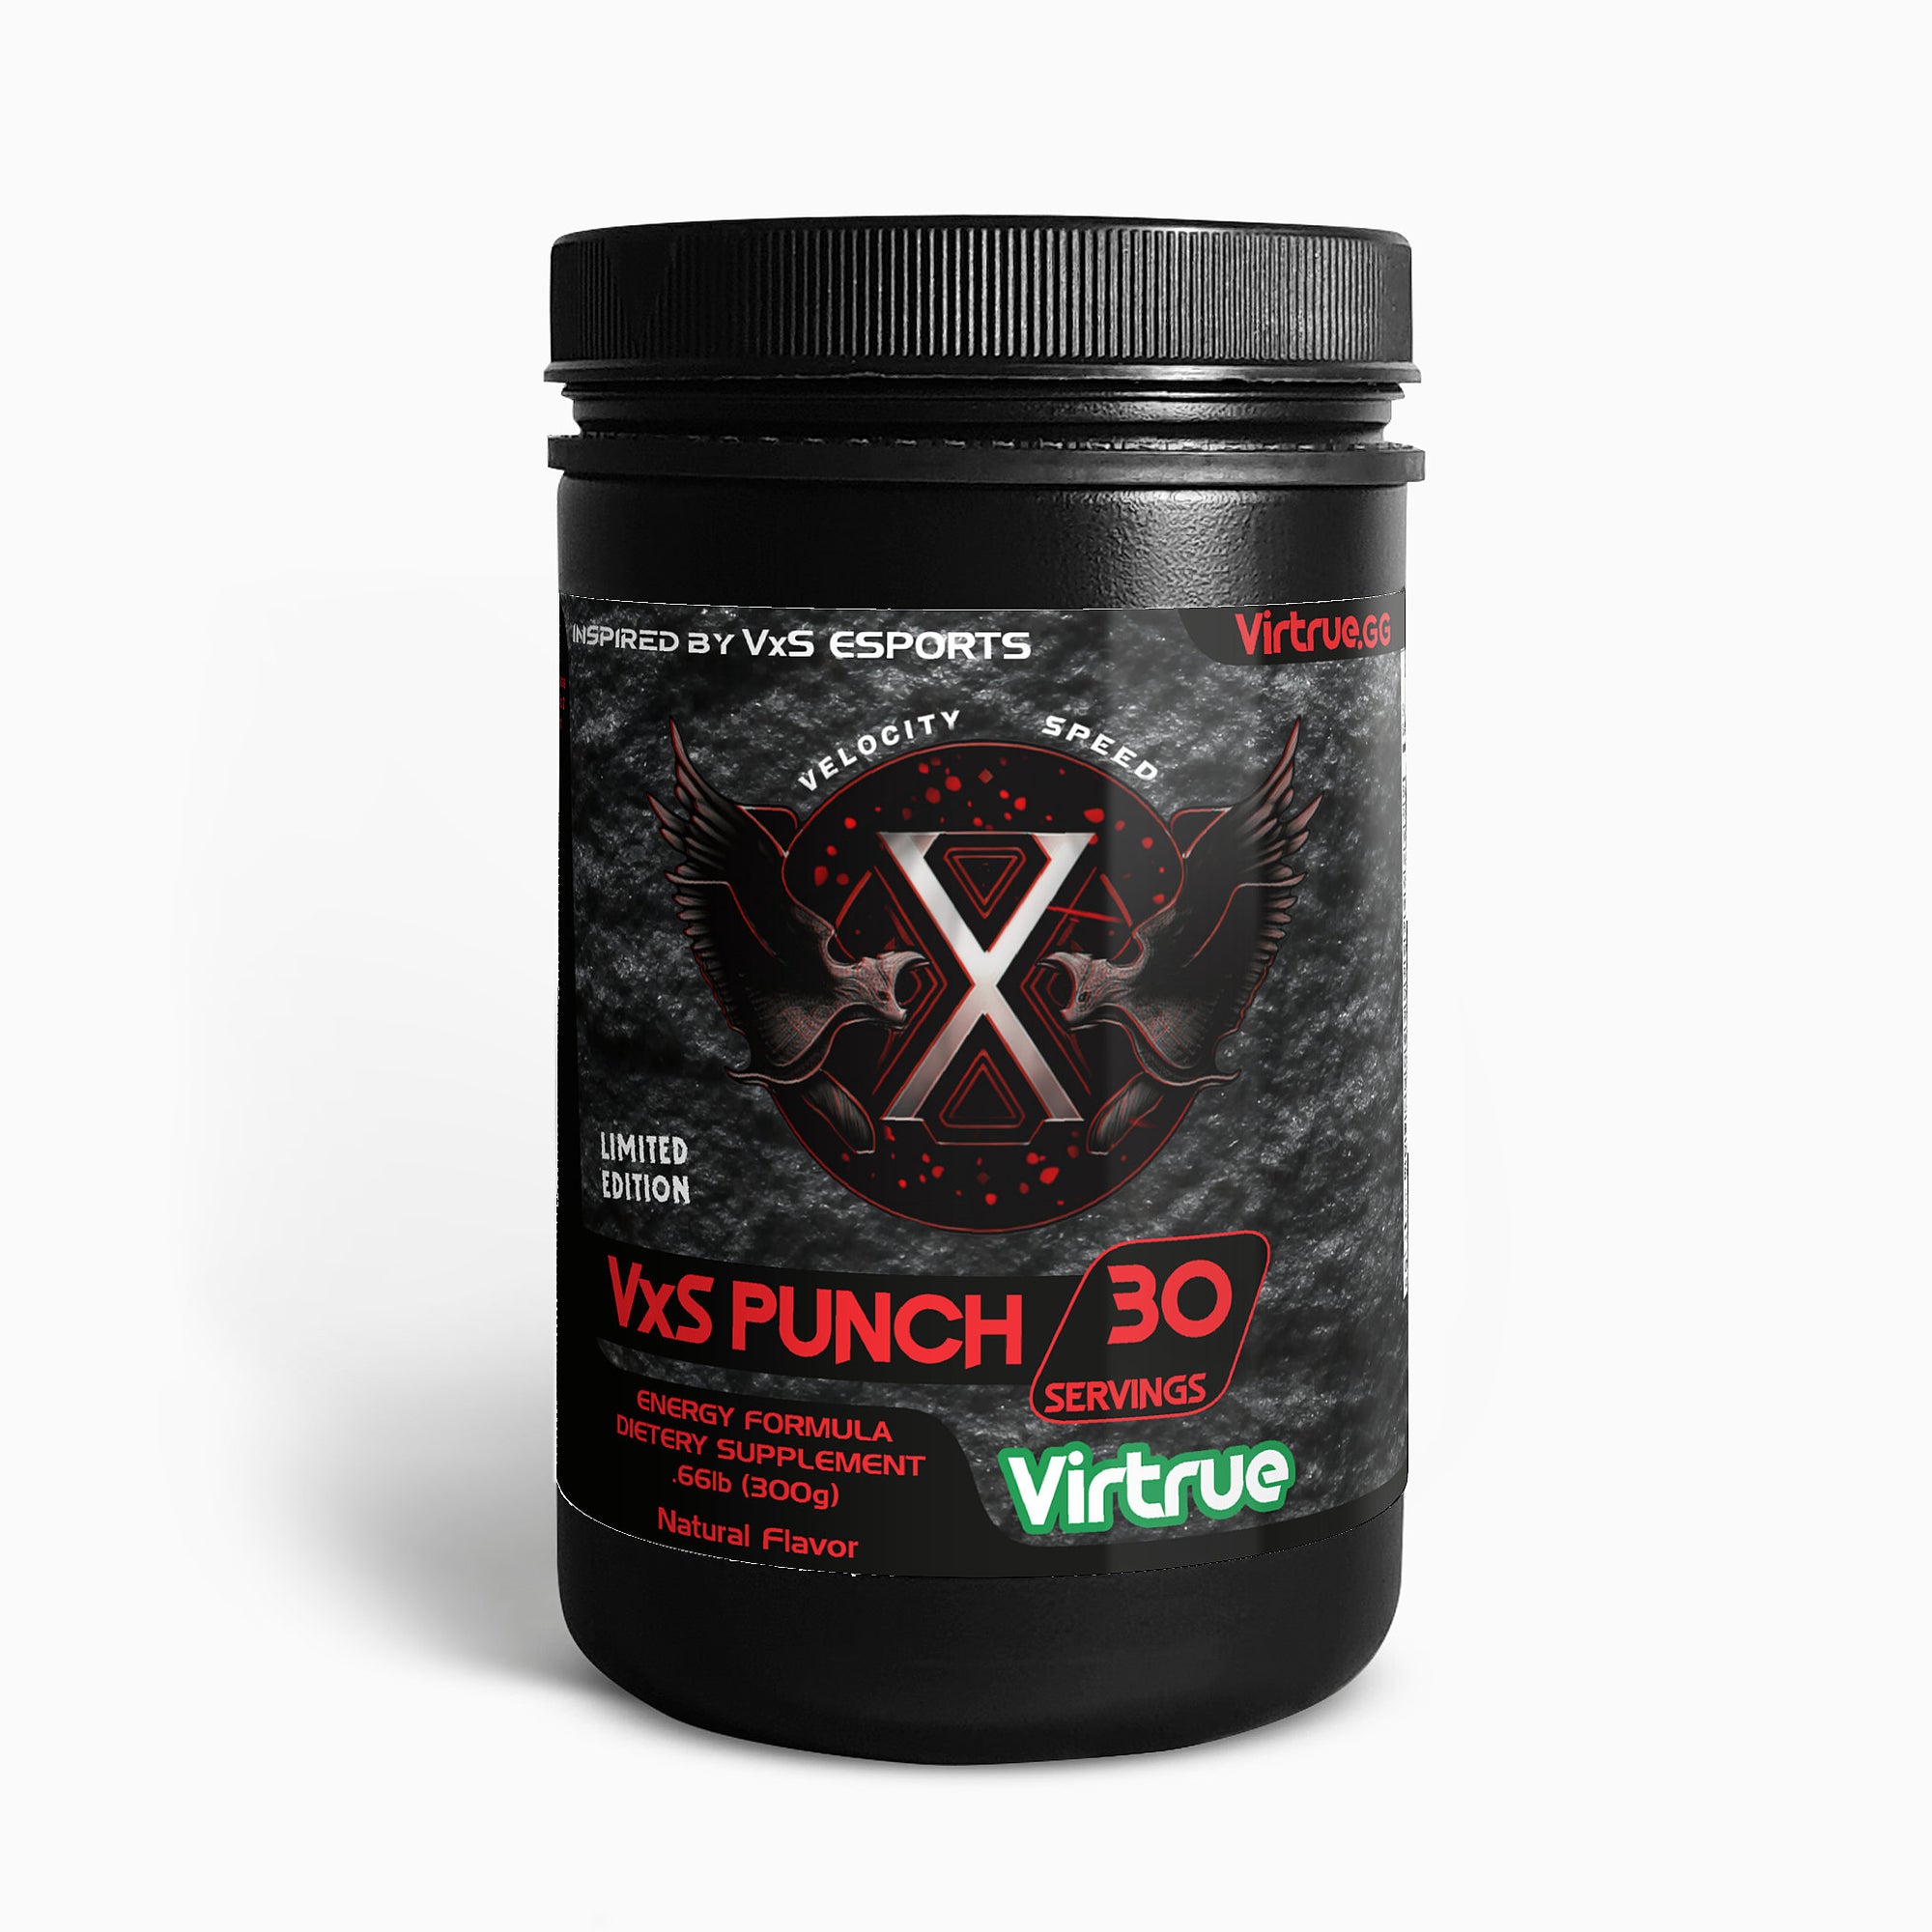 VxS Punch Energy Formula - Inspired by VxS Esports